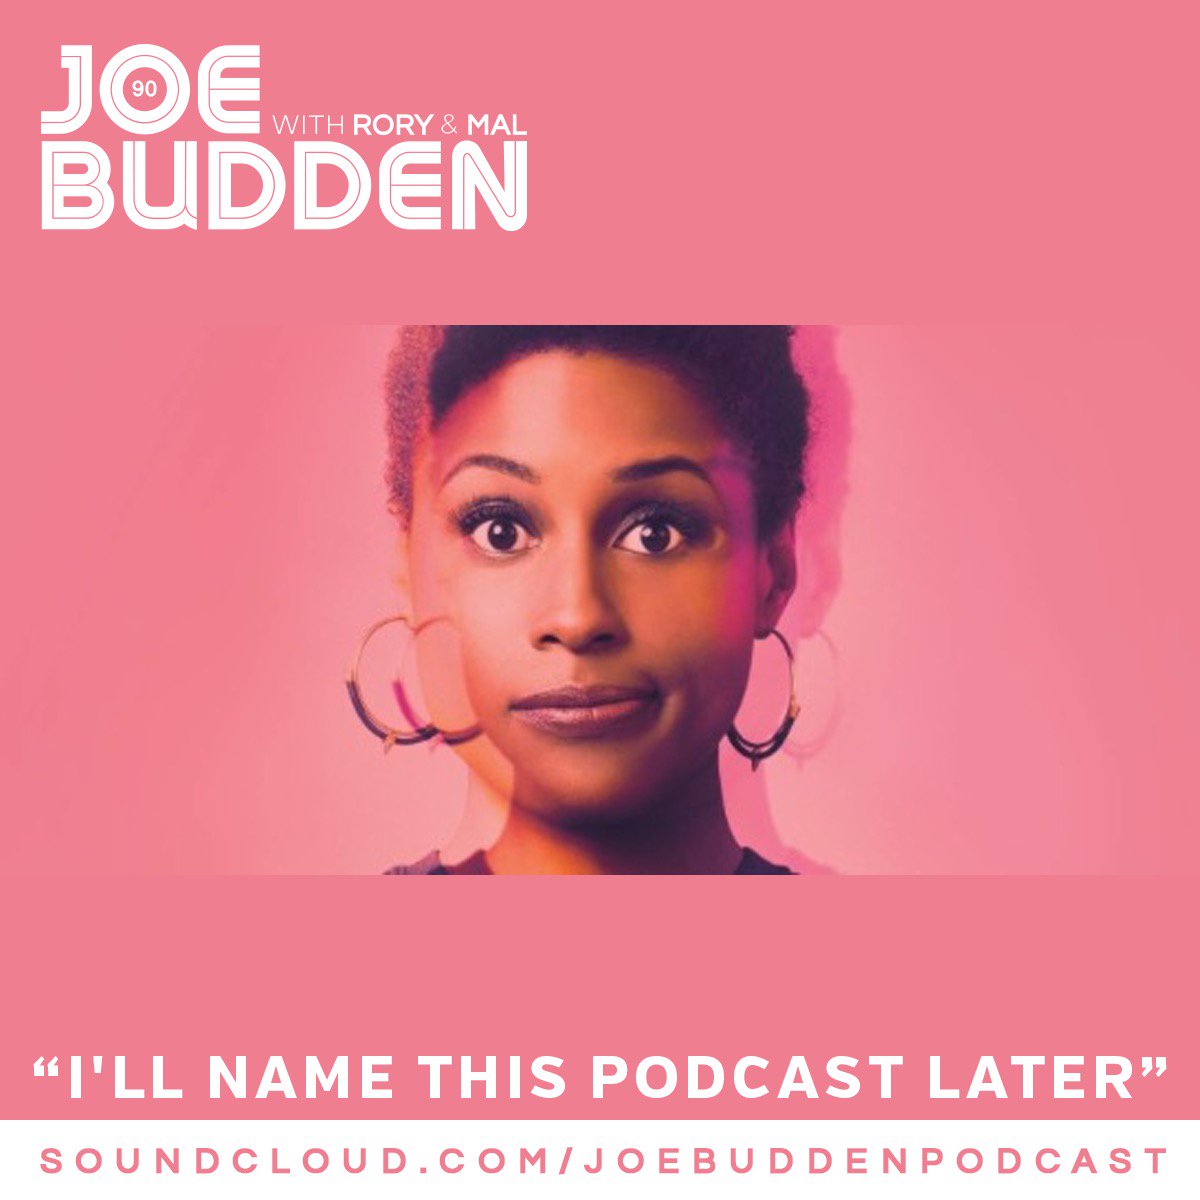 Joe Budden - I'll Name This Podcast Later (Episode 90) with Rory & Mal - miixtapechiick